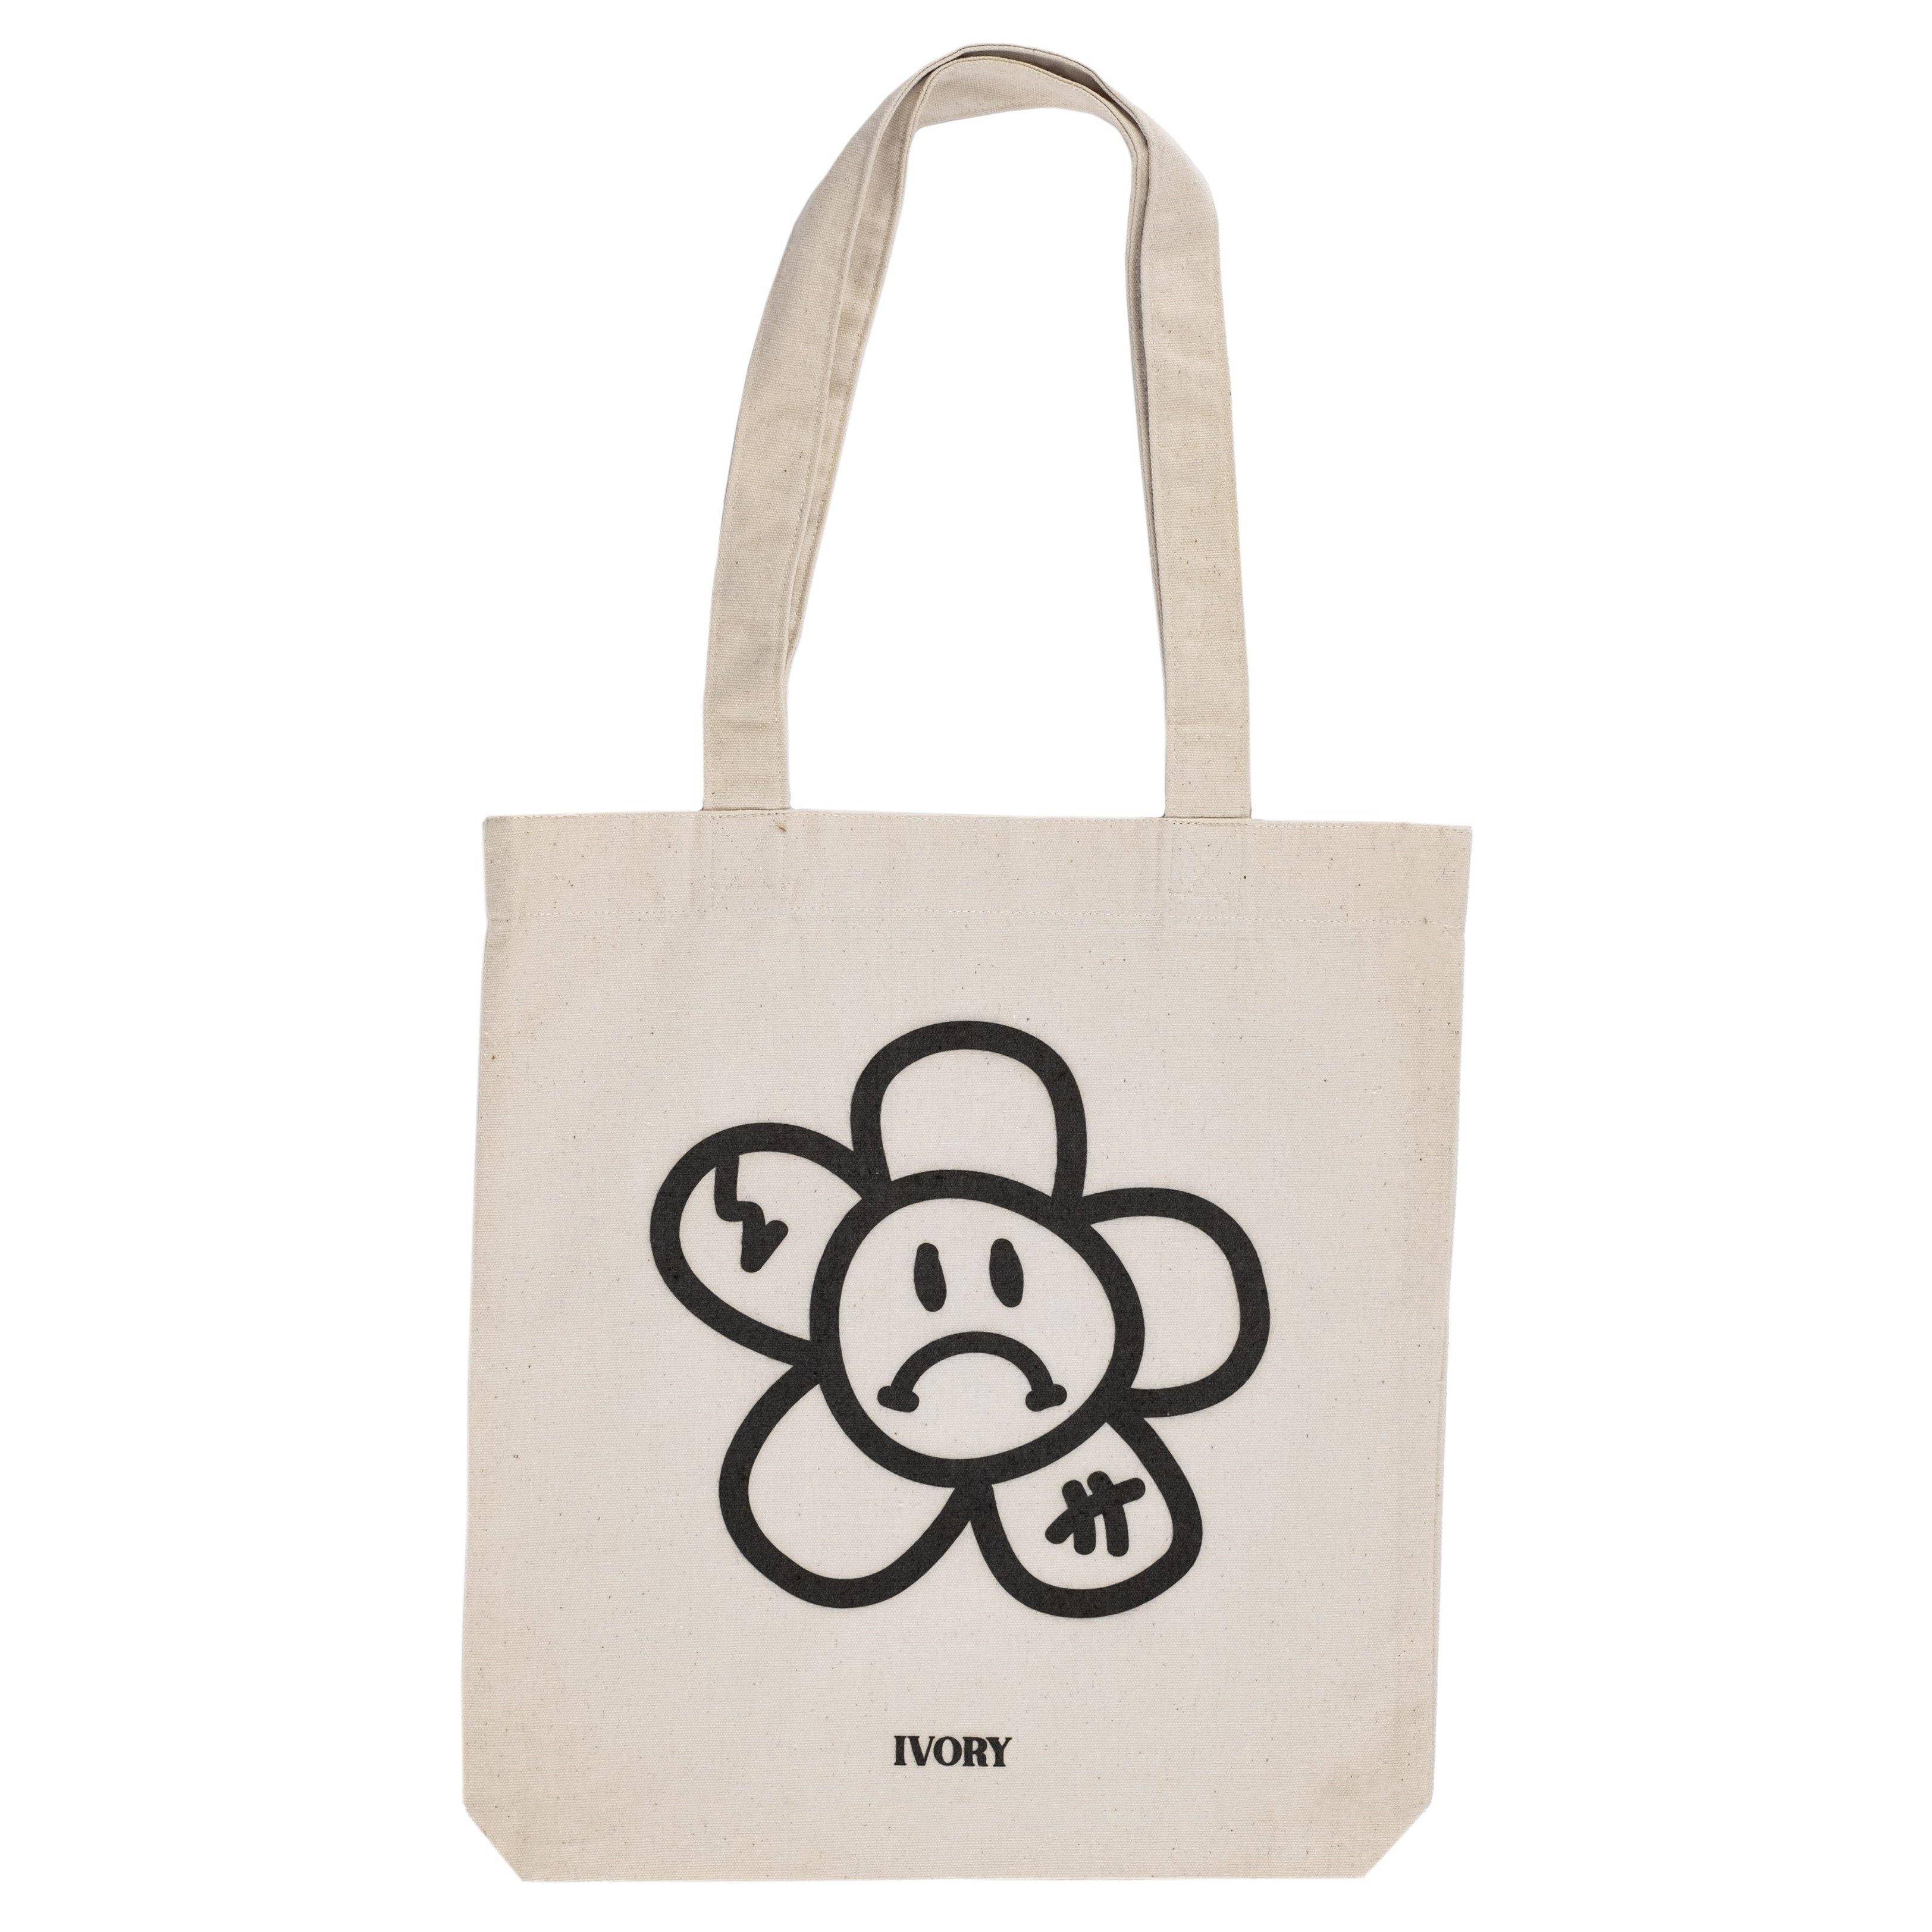 YOU ARE NOT ALONE TOTE BAG - IVORY WORLD